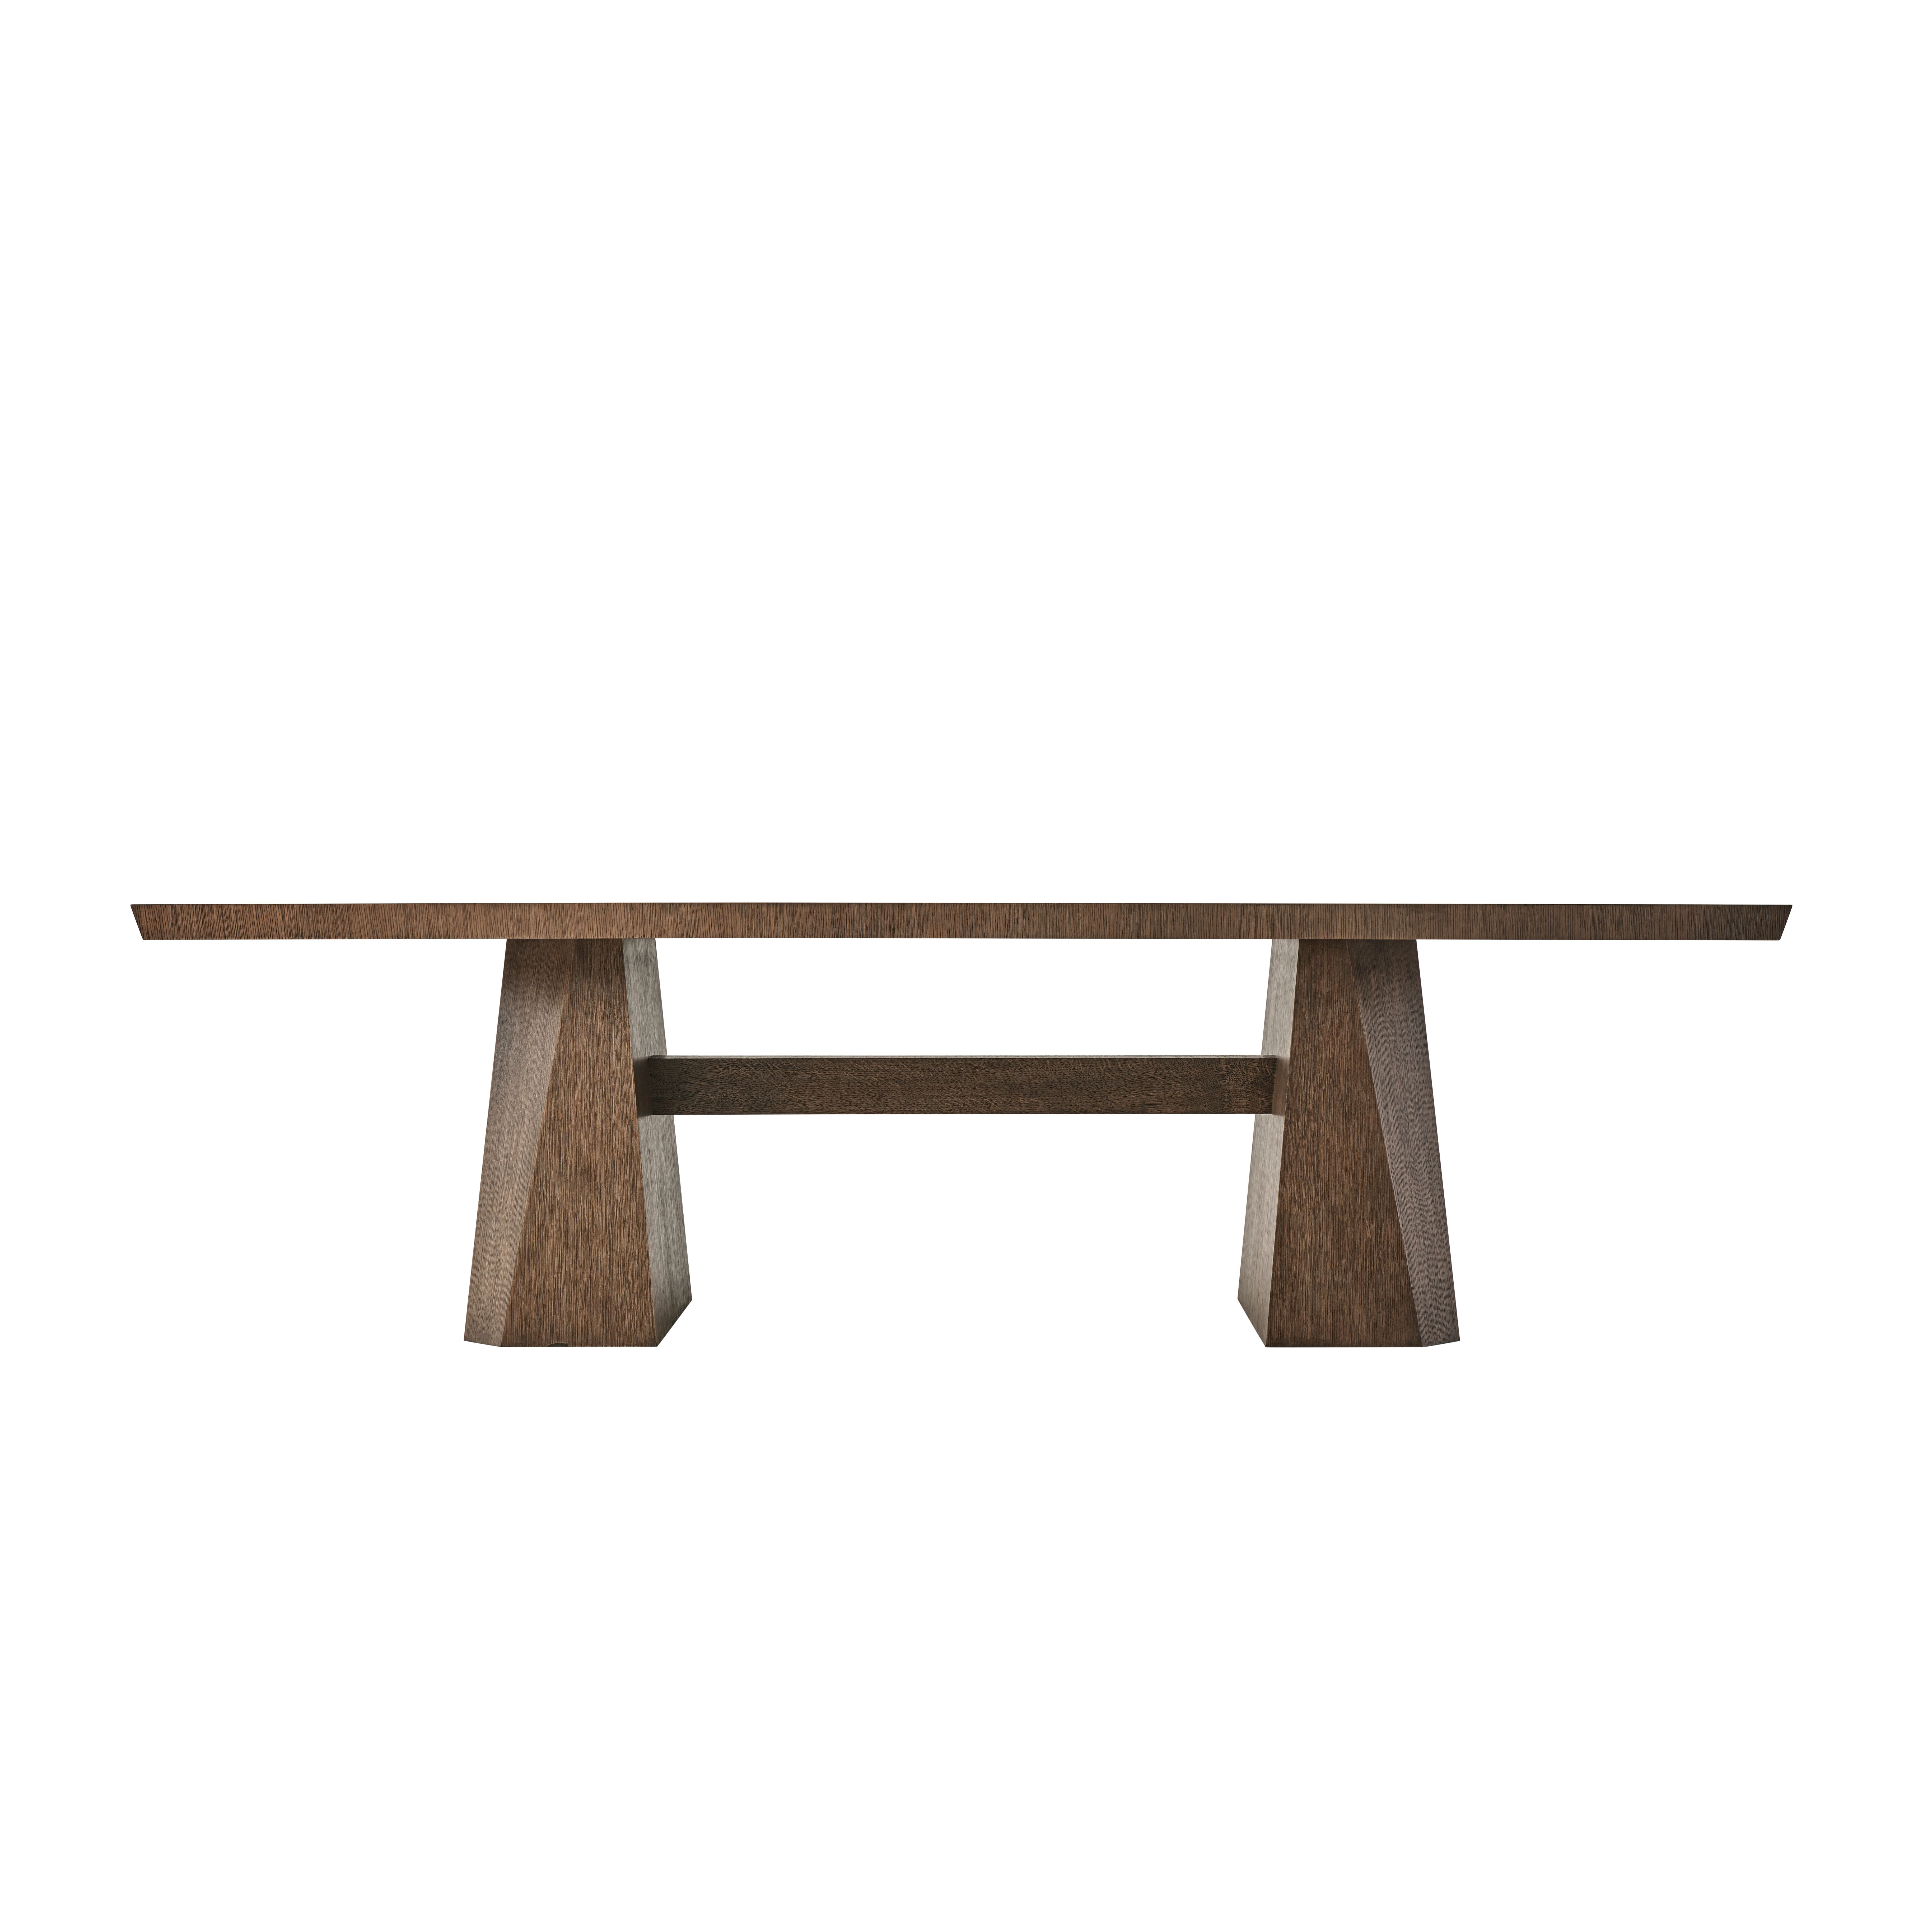 VICENZO DINING TABLE